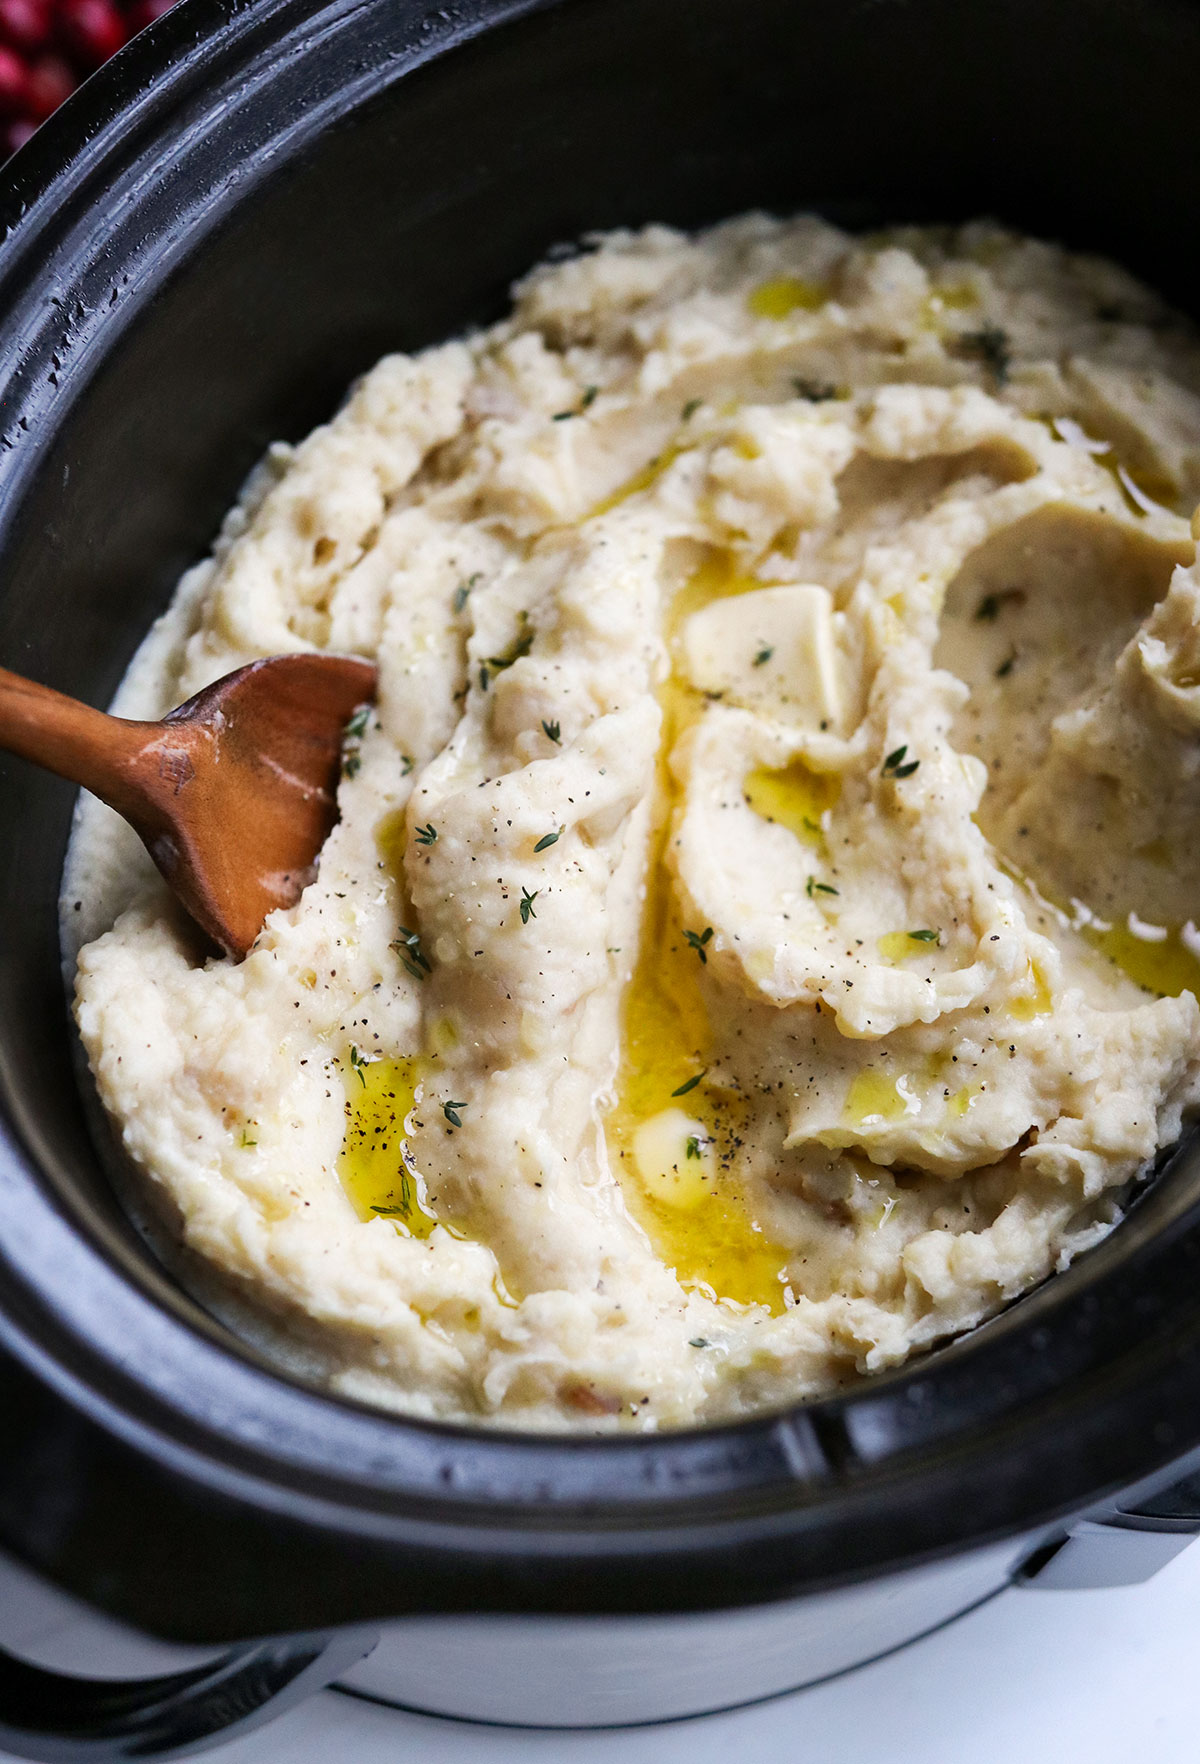 slow cooker mashed potatoes ready to serve with wooden spoon.